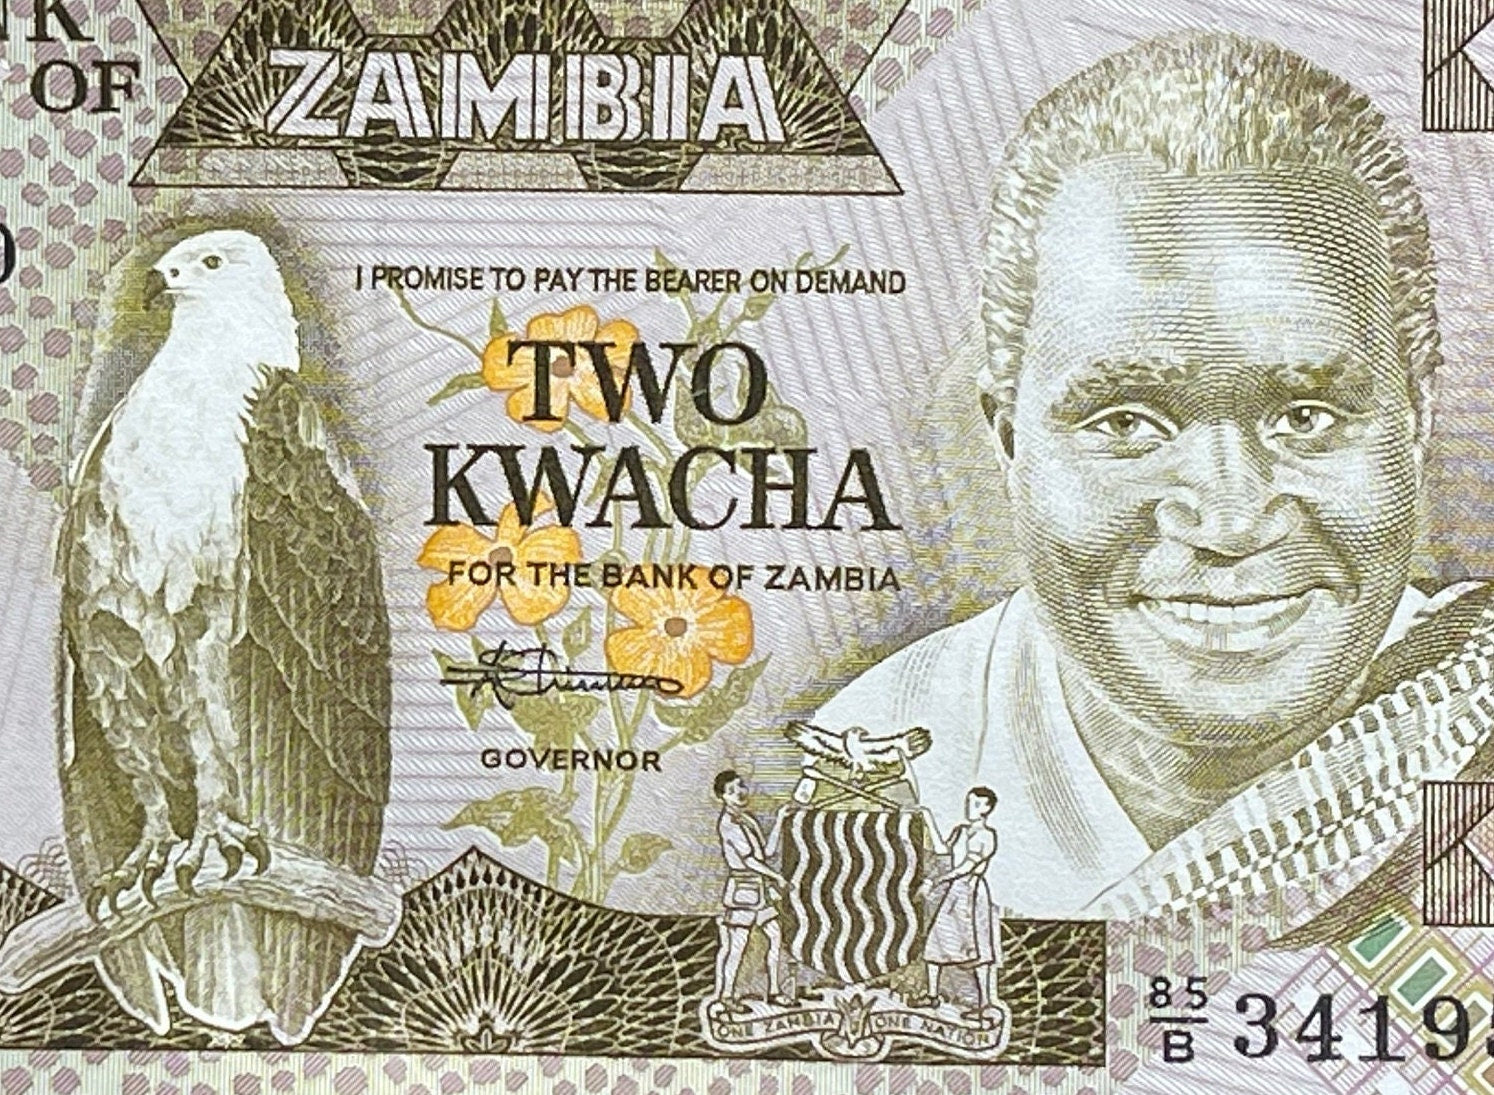 President Kenneth Kaunda and African Eagle & Teacher with Student 2 Kwacha Zambia Authentic Banknote Money for Jewelry and Collage (Kwanzaa)